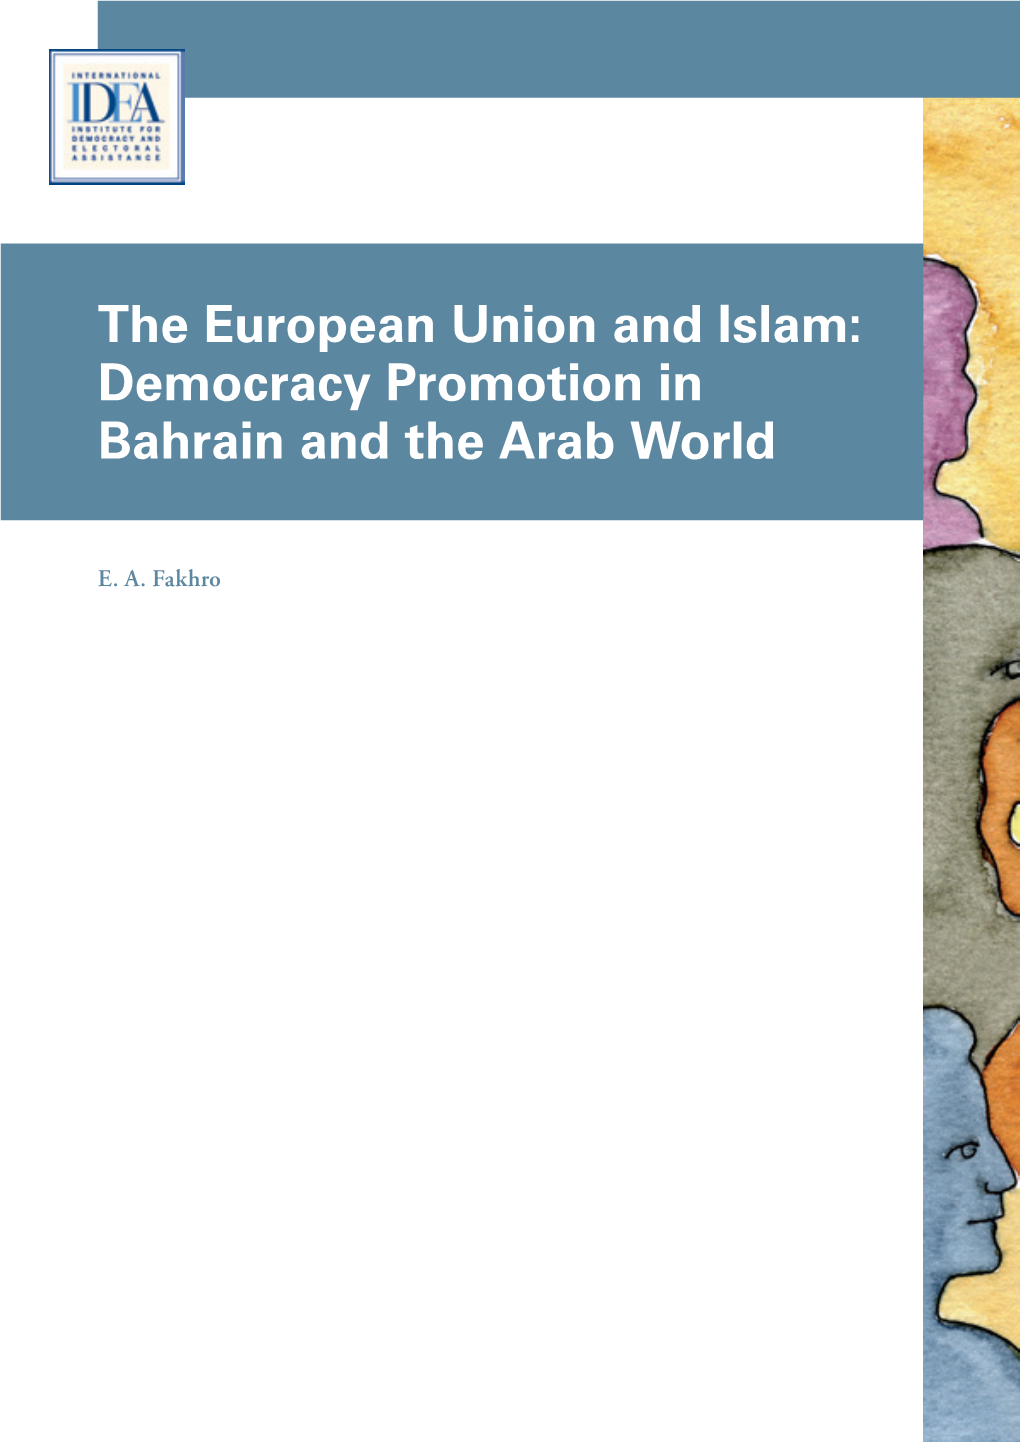 The European Union and Islam: Democracy Promotion in Bahrain and the Arab World